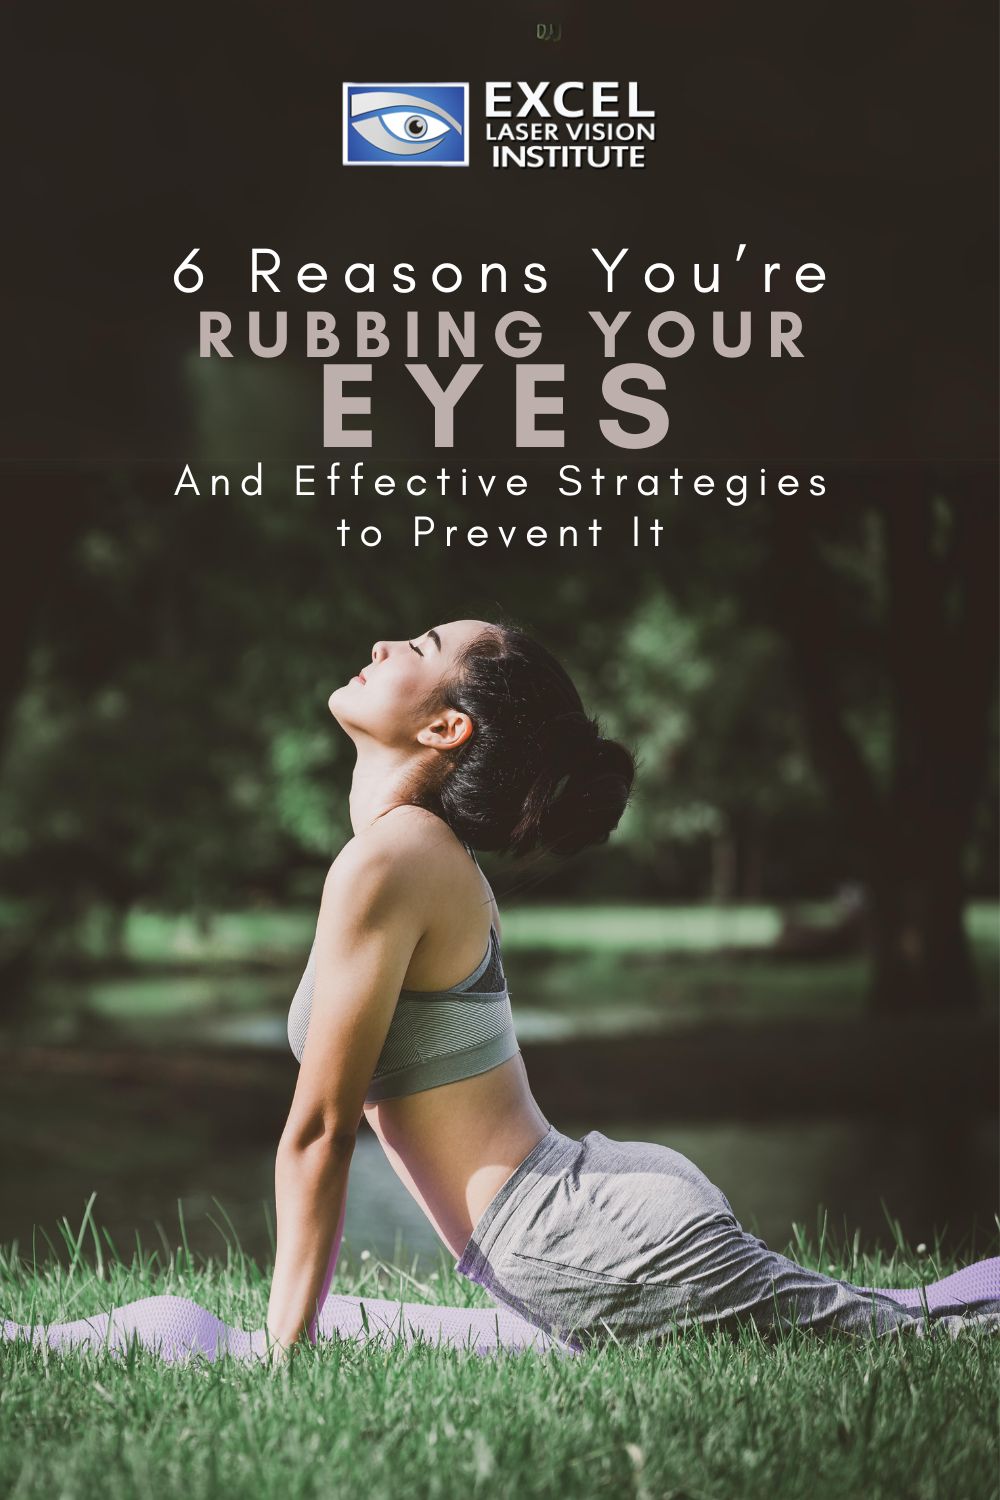 woman-doing-yoga-6-Reasons-Youre-Rubbing-Your-Eyes-And-Effective-Strategies-to-Prevent-It-Pinterest-Pin